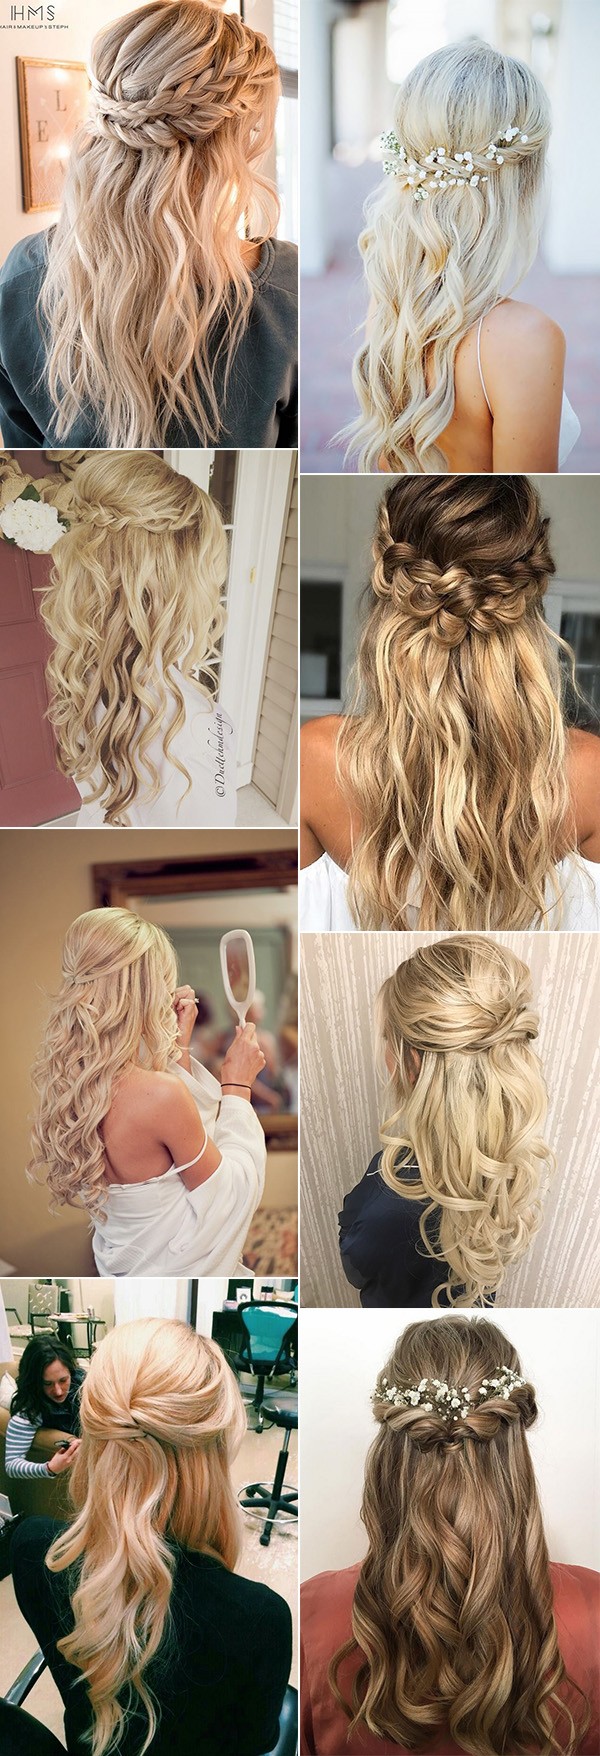 10 Latest and Stylish Wedding Hairstyles for Curly Hair